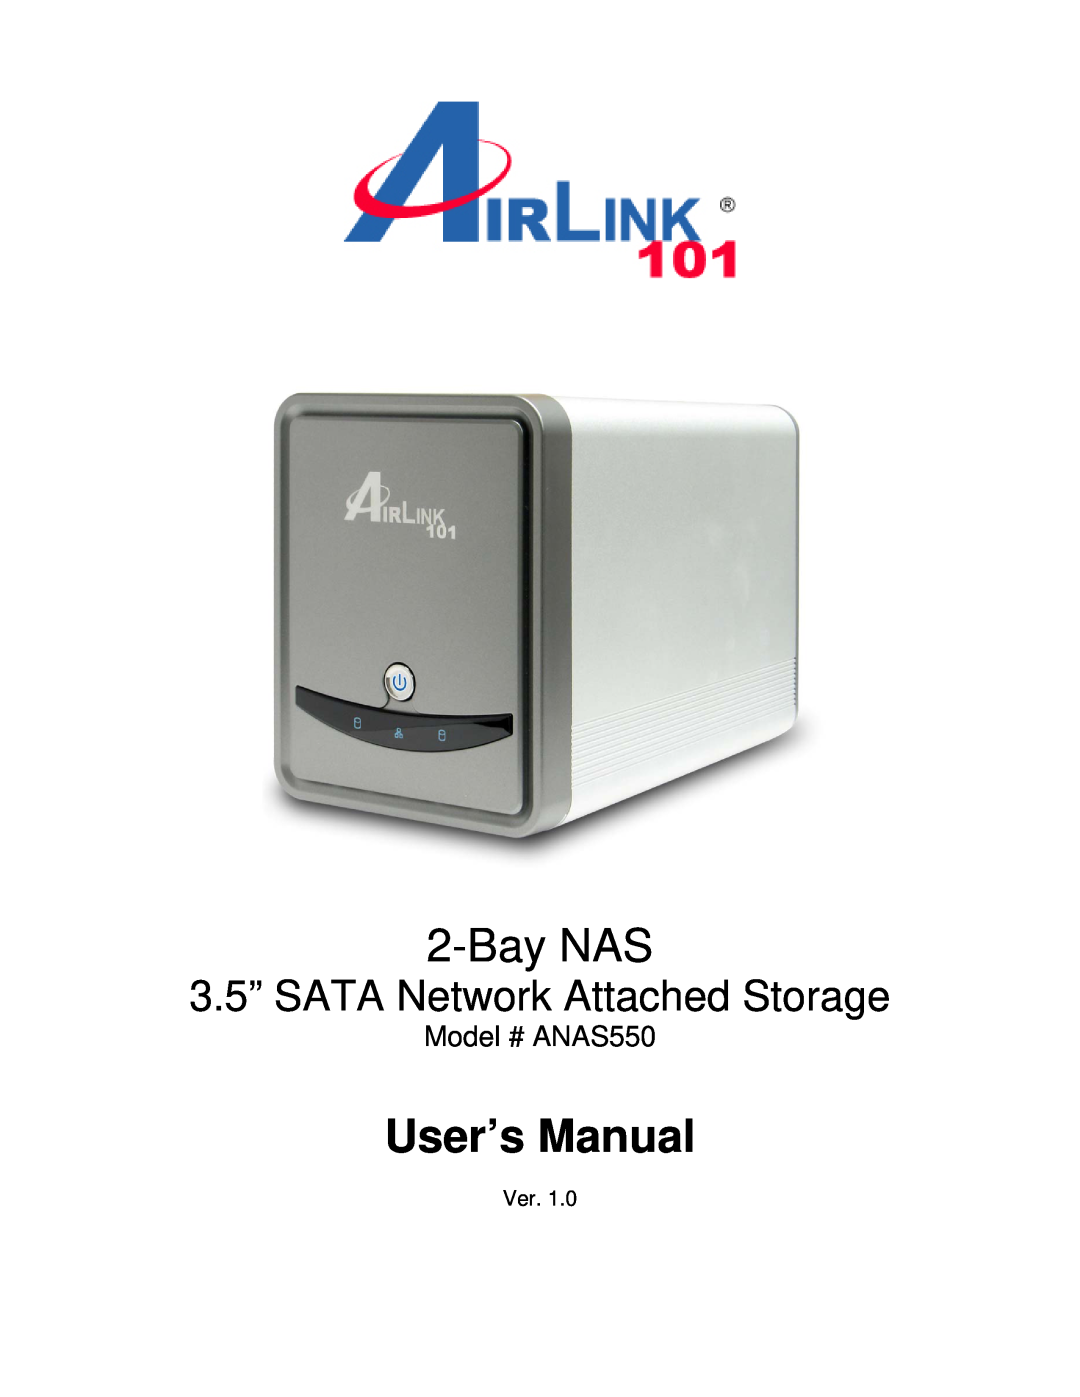 Airlink101 user manual Bay NAS, User’s Manual, 3.5” SATA Network Attached Storage, Model # ANAS550 